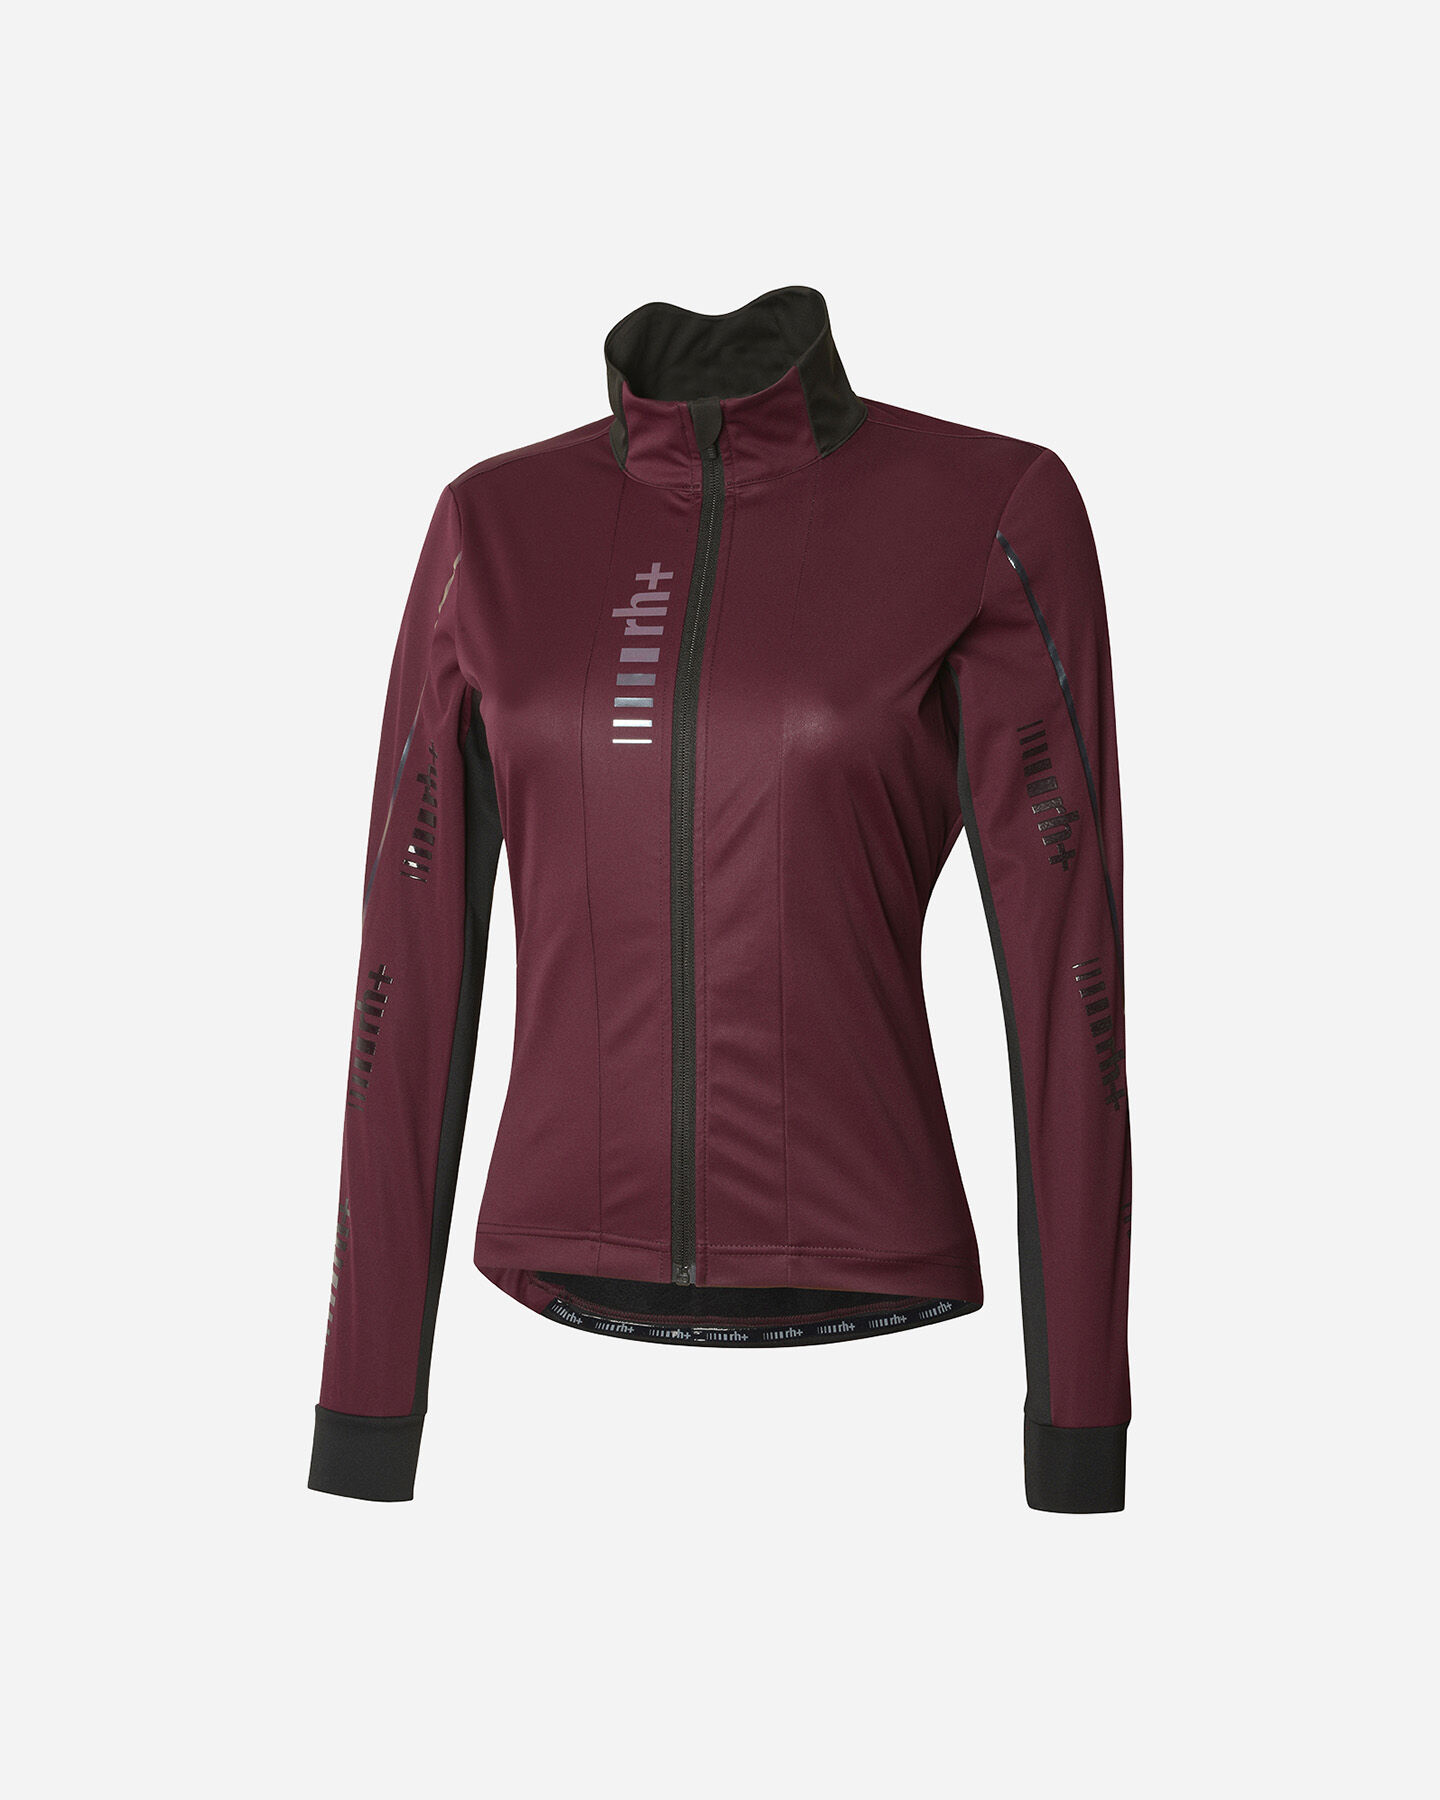  Giacca ciclismo RH+ LADY CODE WIND W S4115147|1|S scatto 0